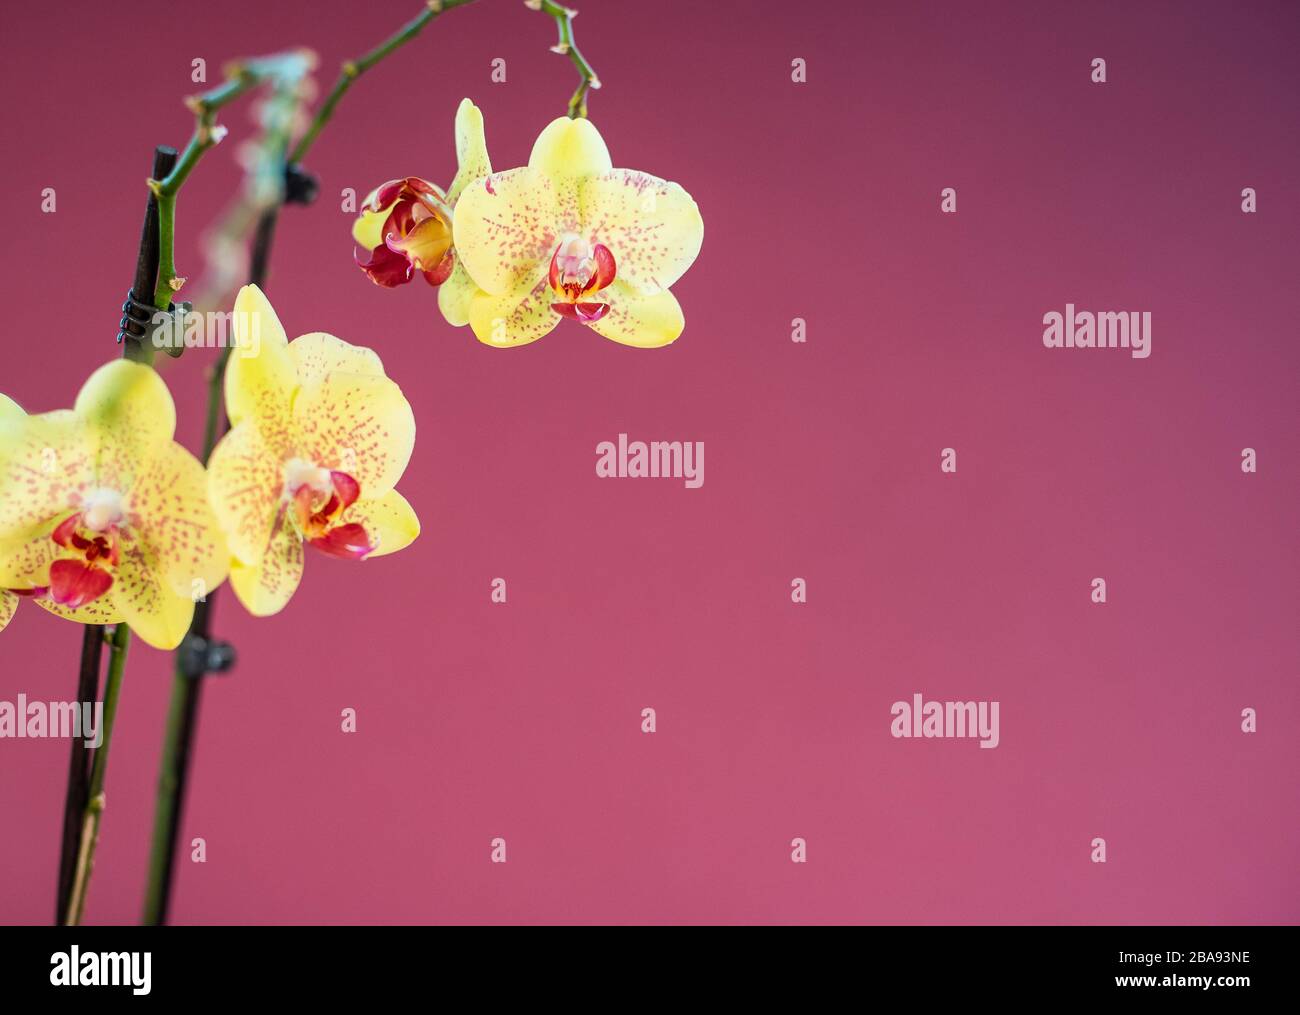 Yellow orchid flower on pink background Stock Photo